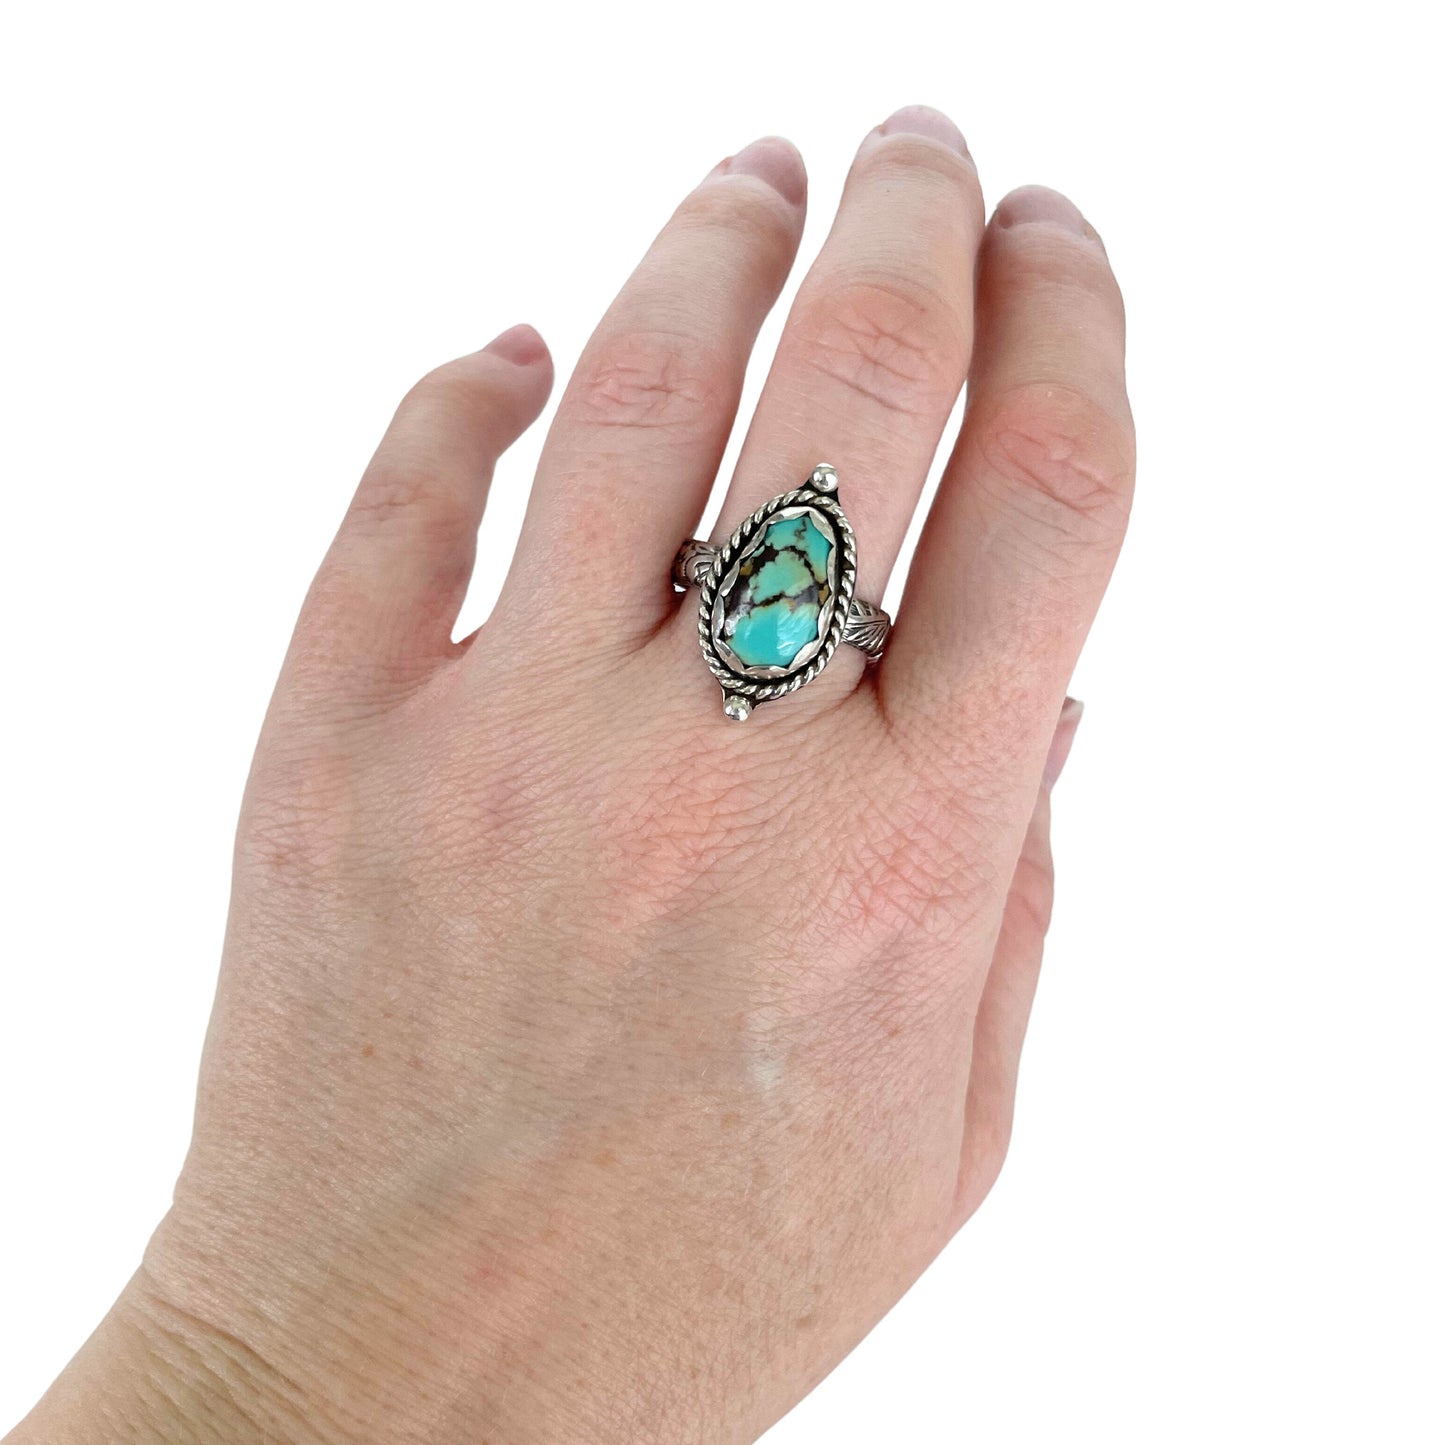 Golden Hills Turquoise Sterling Silver Ring, Size 8 - worn on middle finger.